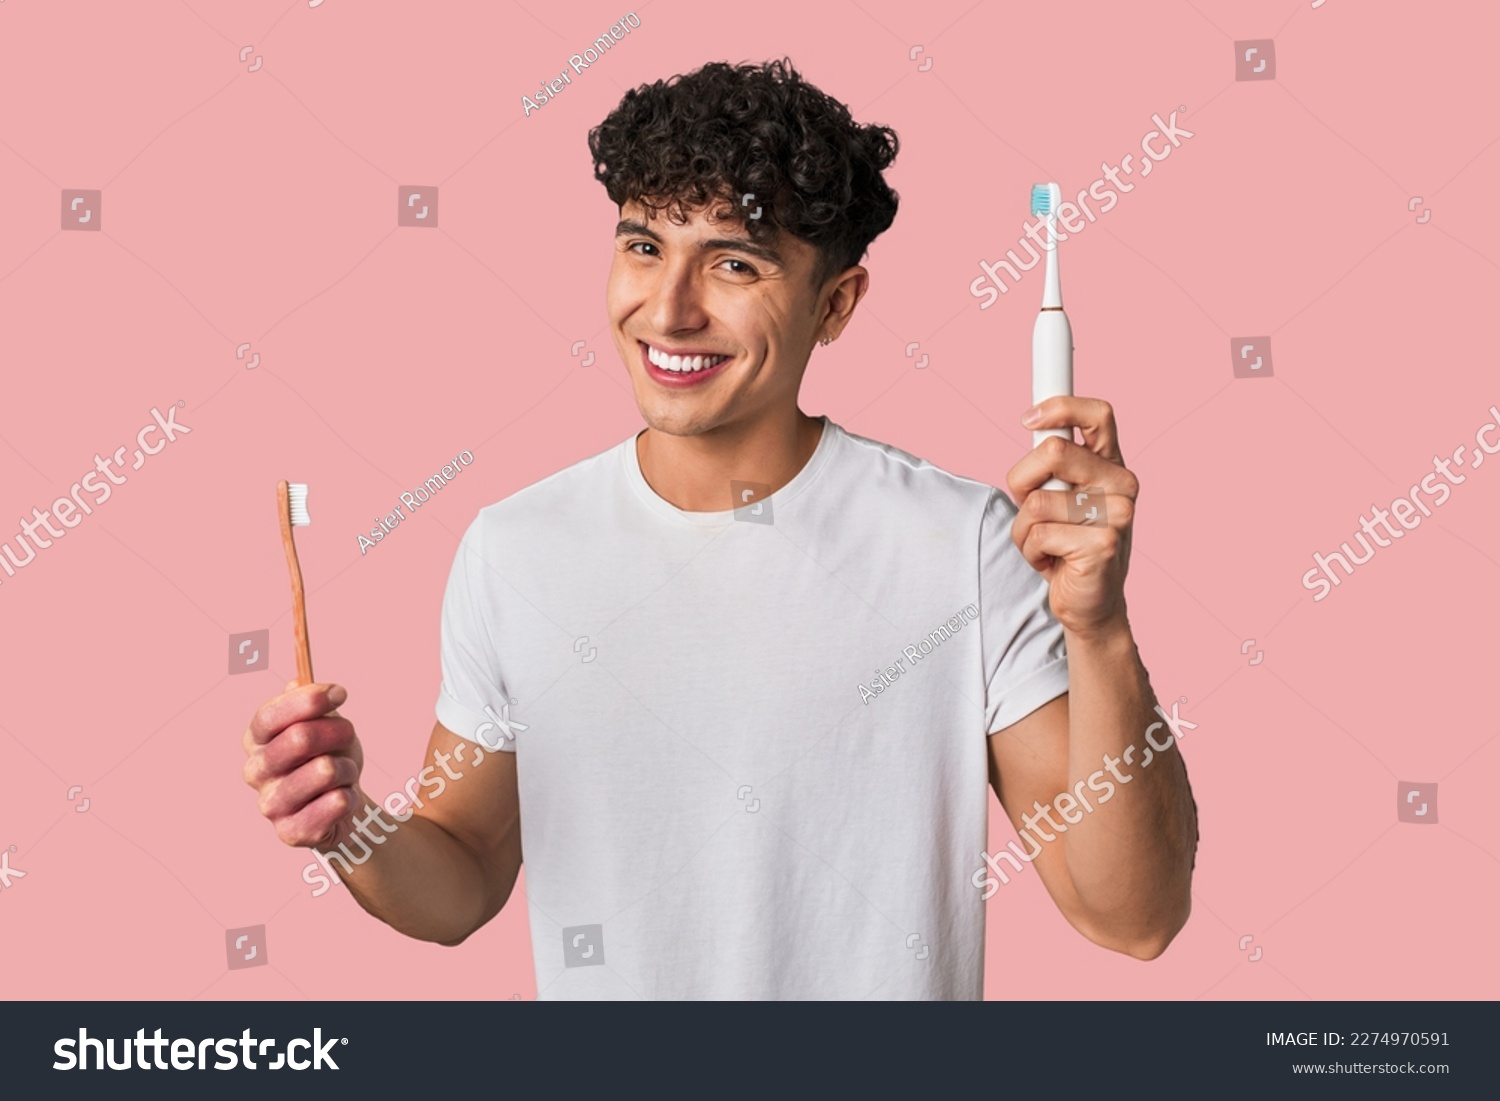 A young man compares manual vs electric toothbrush for optimal dental care - weighing effectiveness, convenience, and cost. #2274970591